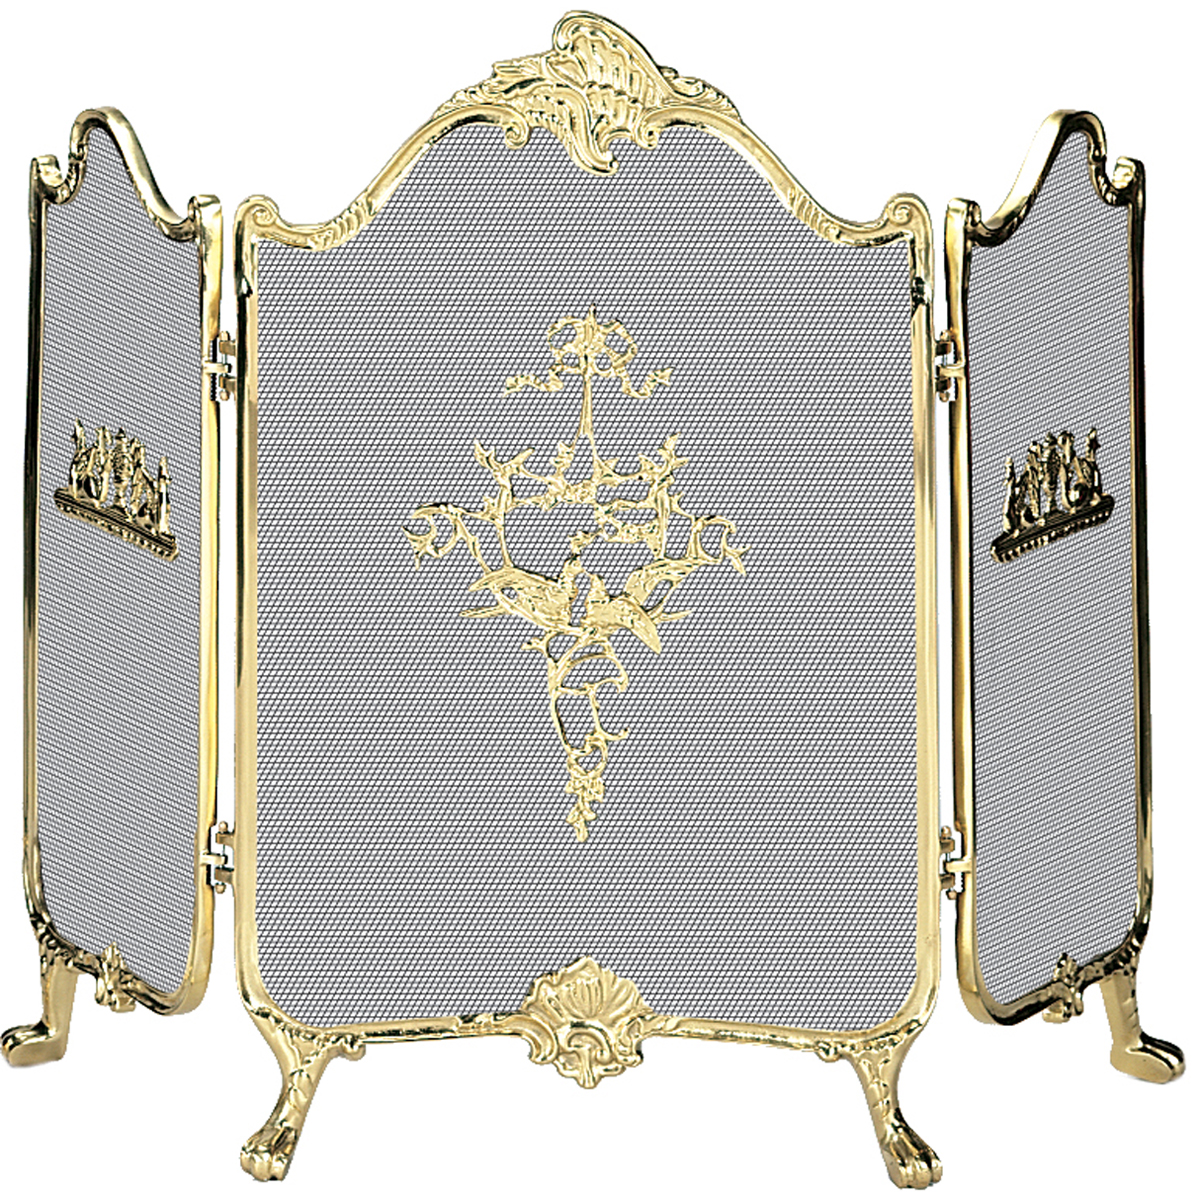 UniFlame 3 Fold Ornate Fully Cast Solid Brass Screen